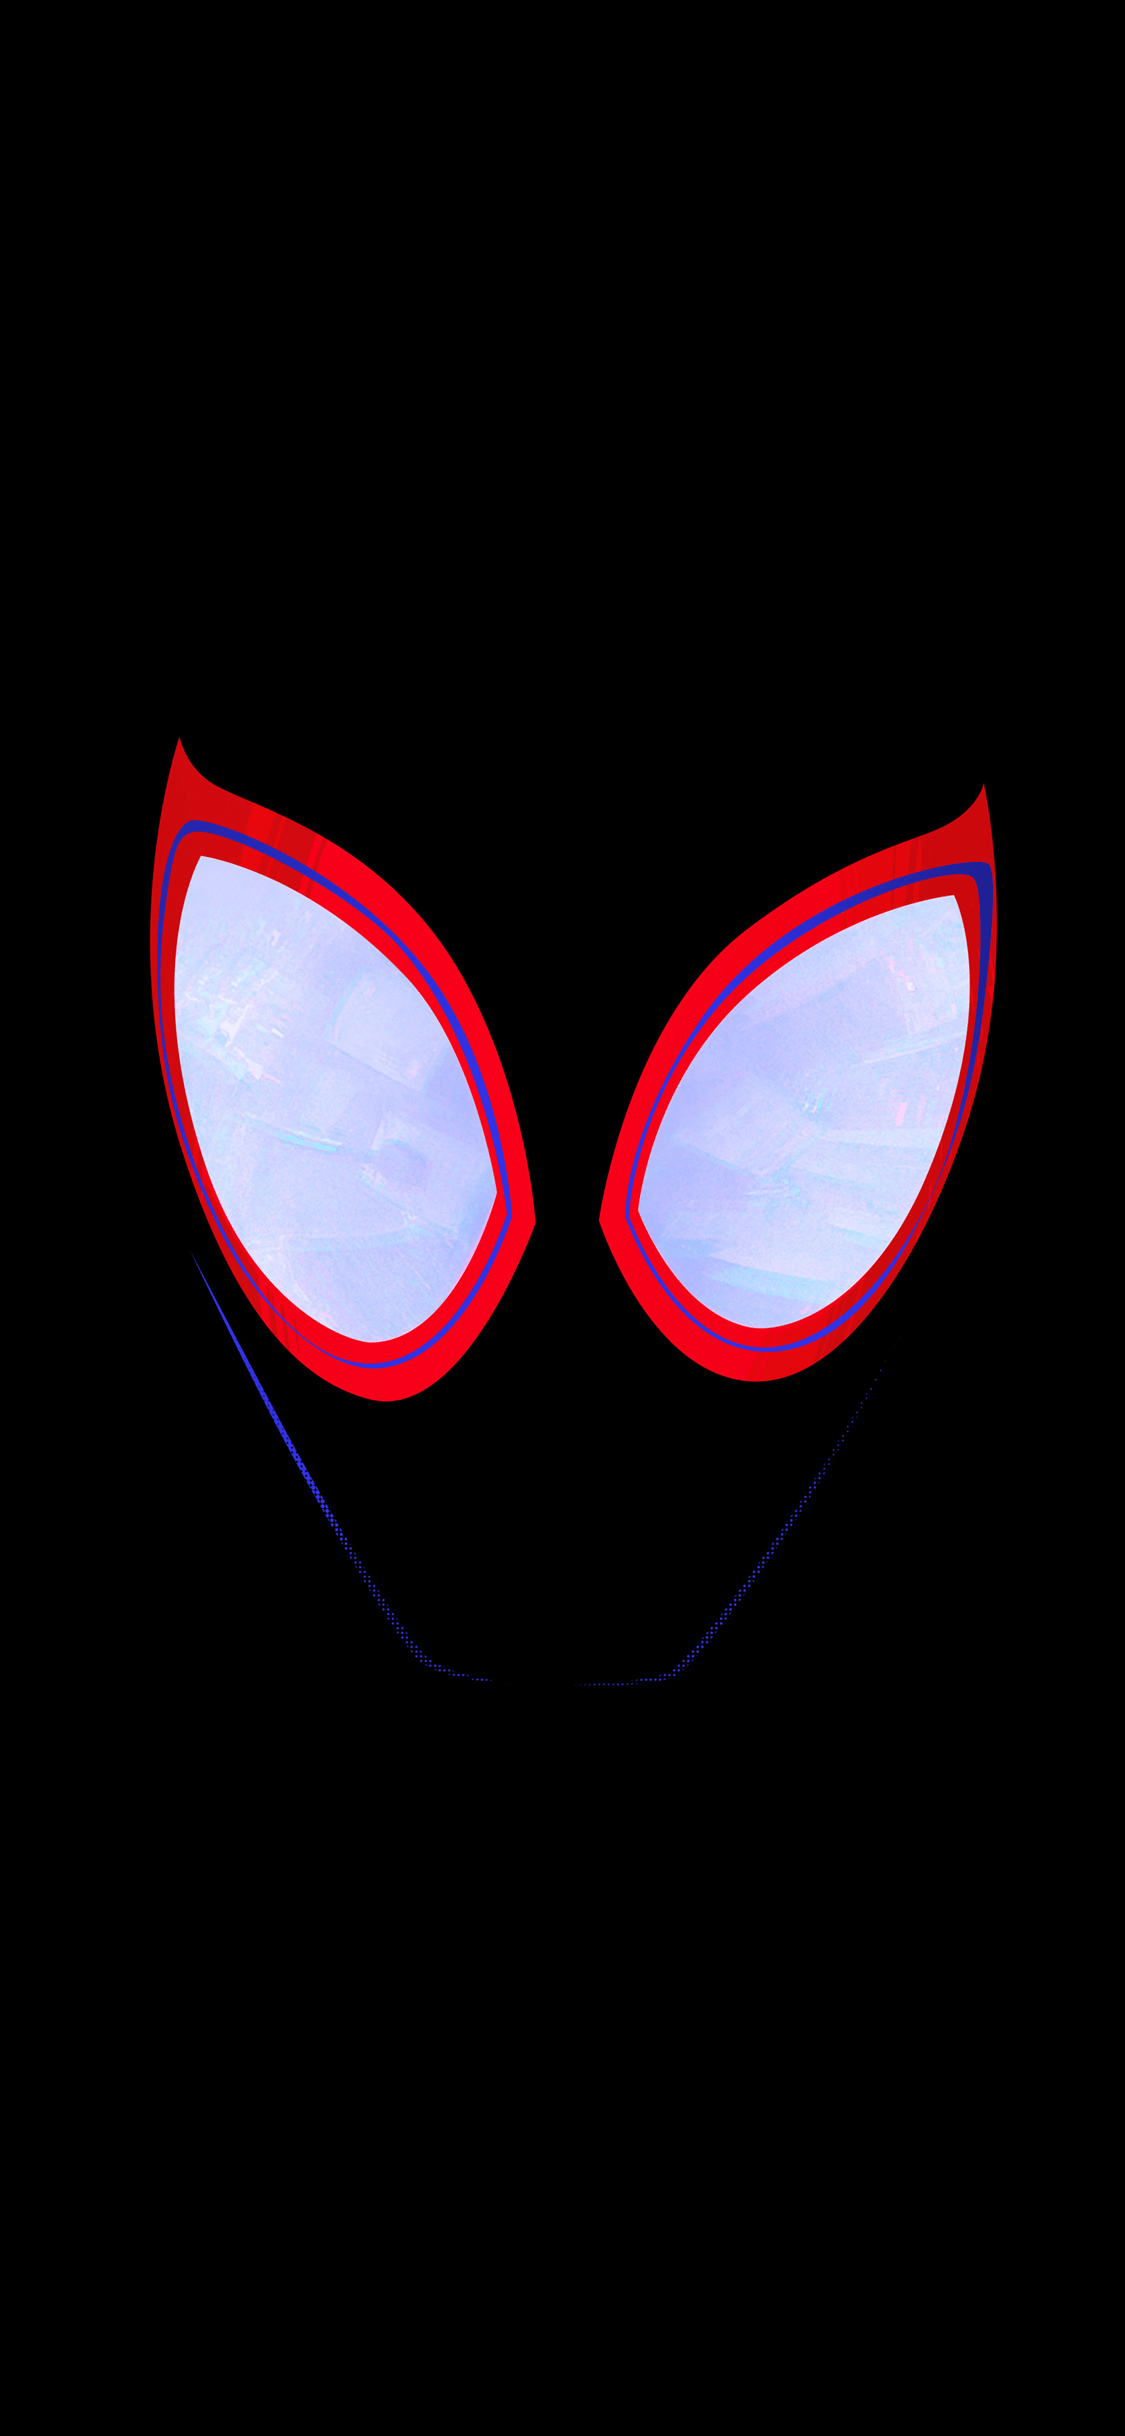 I really liked the mask poster for into the spider verse, so